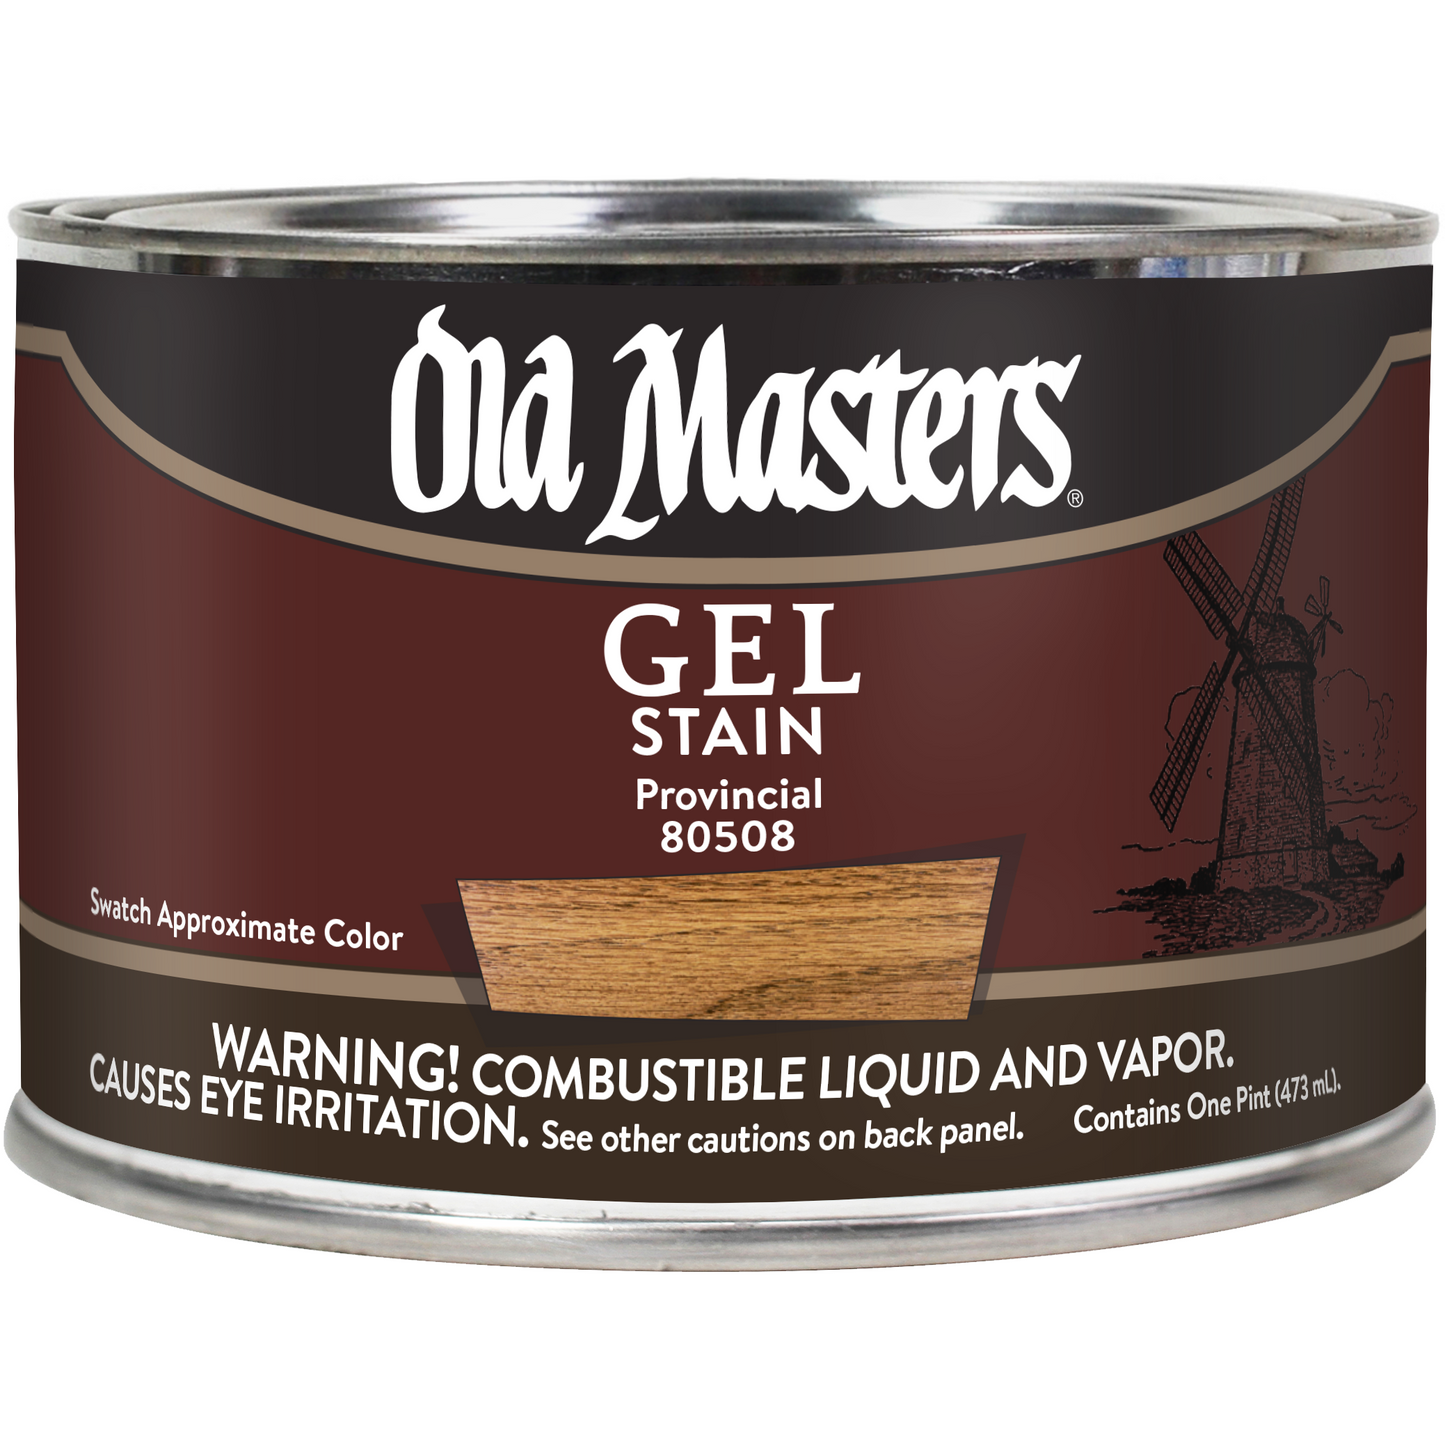 Old Masters Gel Stain - Provincial